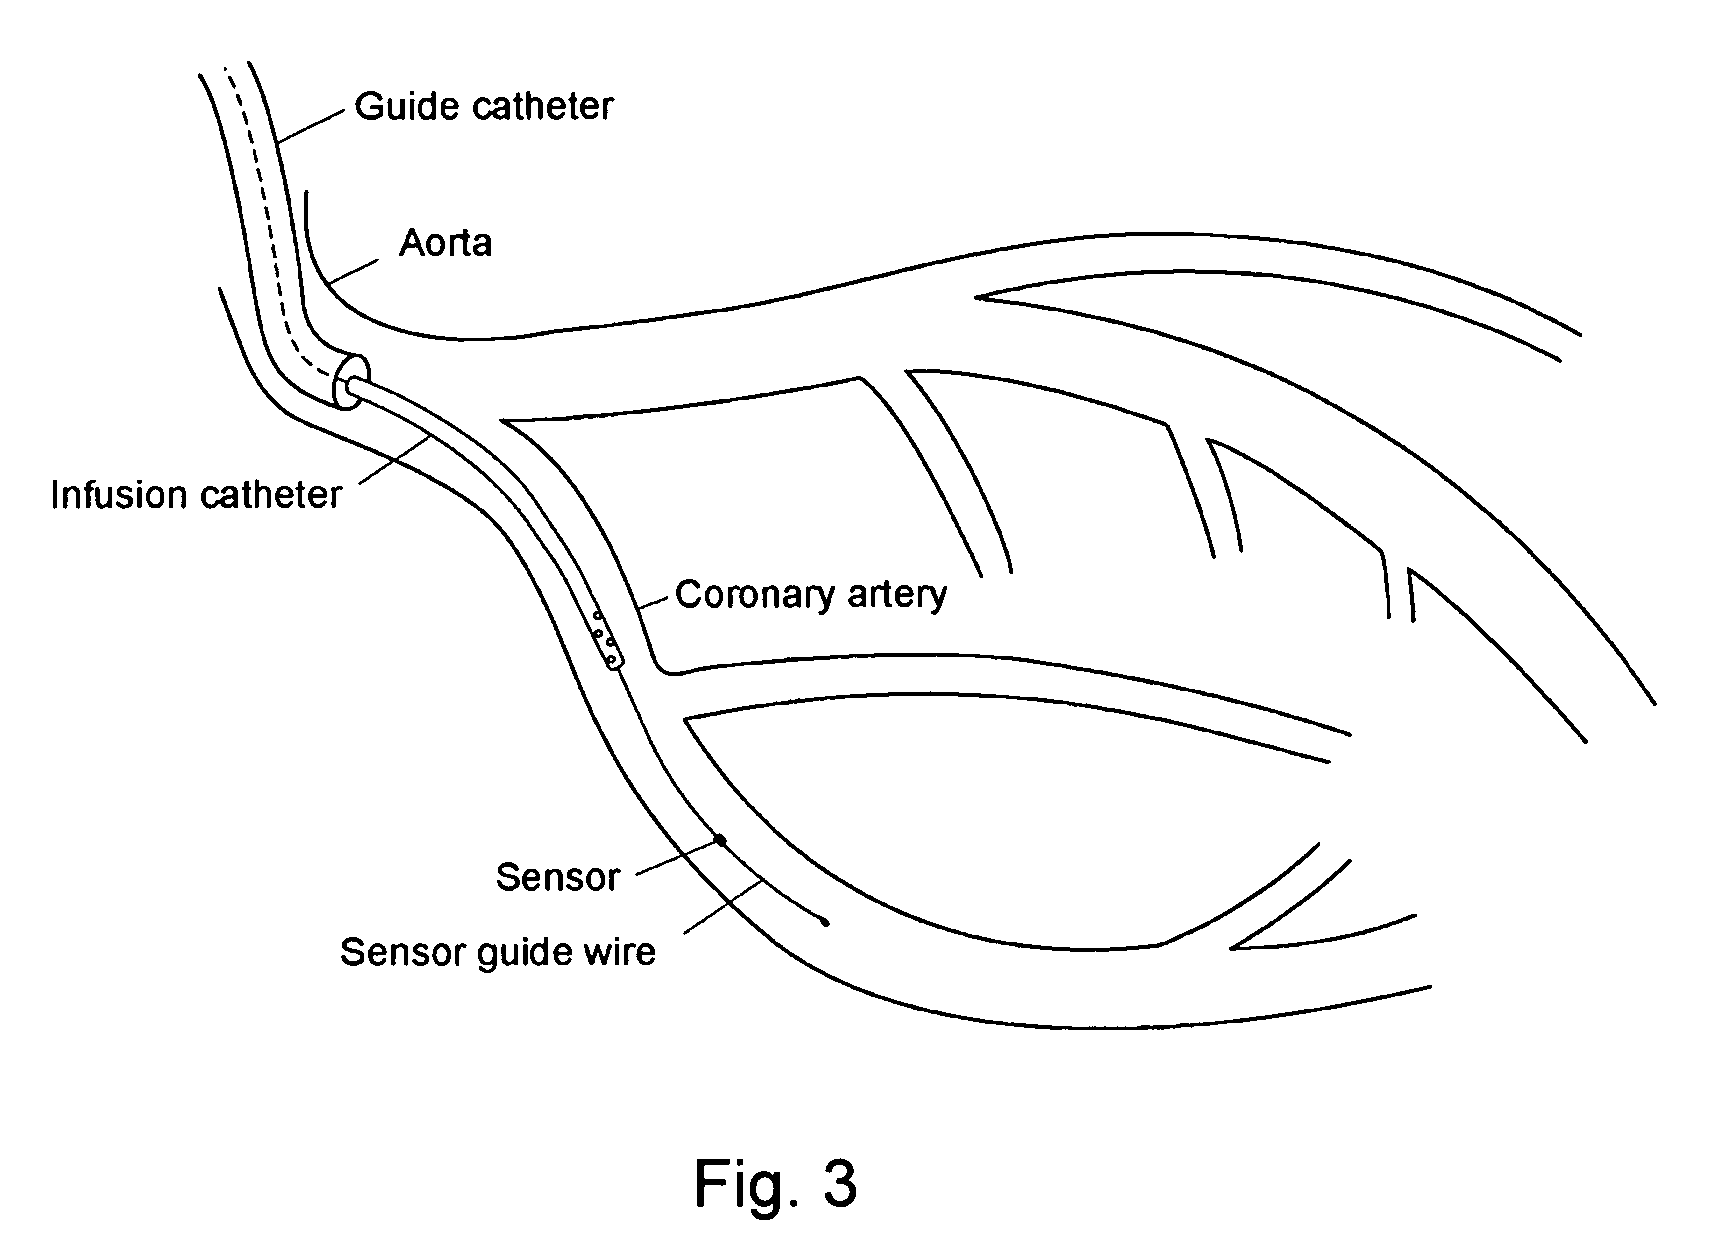 Method for determining the blood flow in a coronary artery